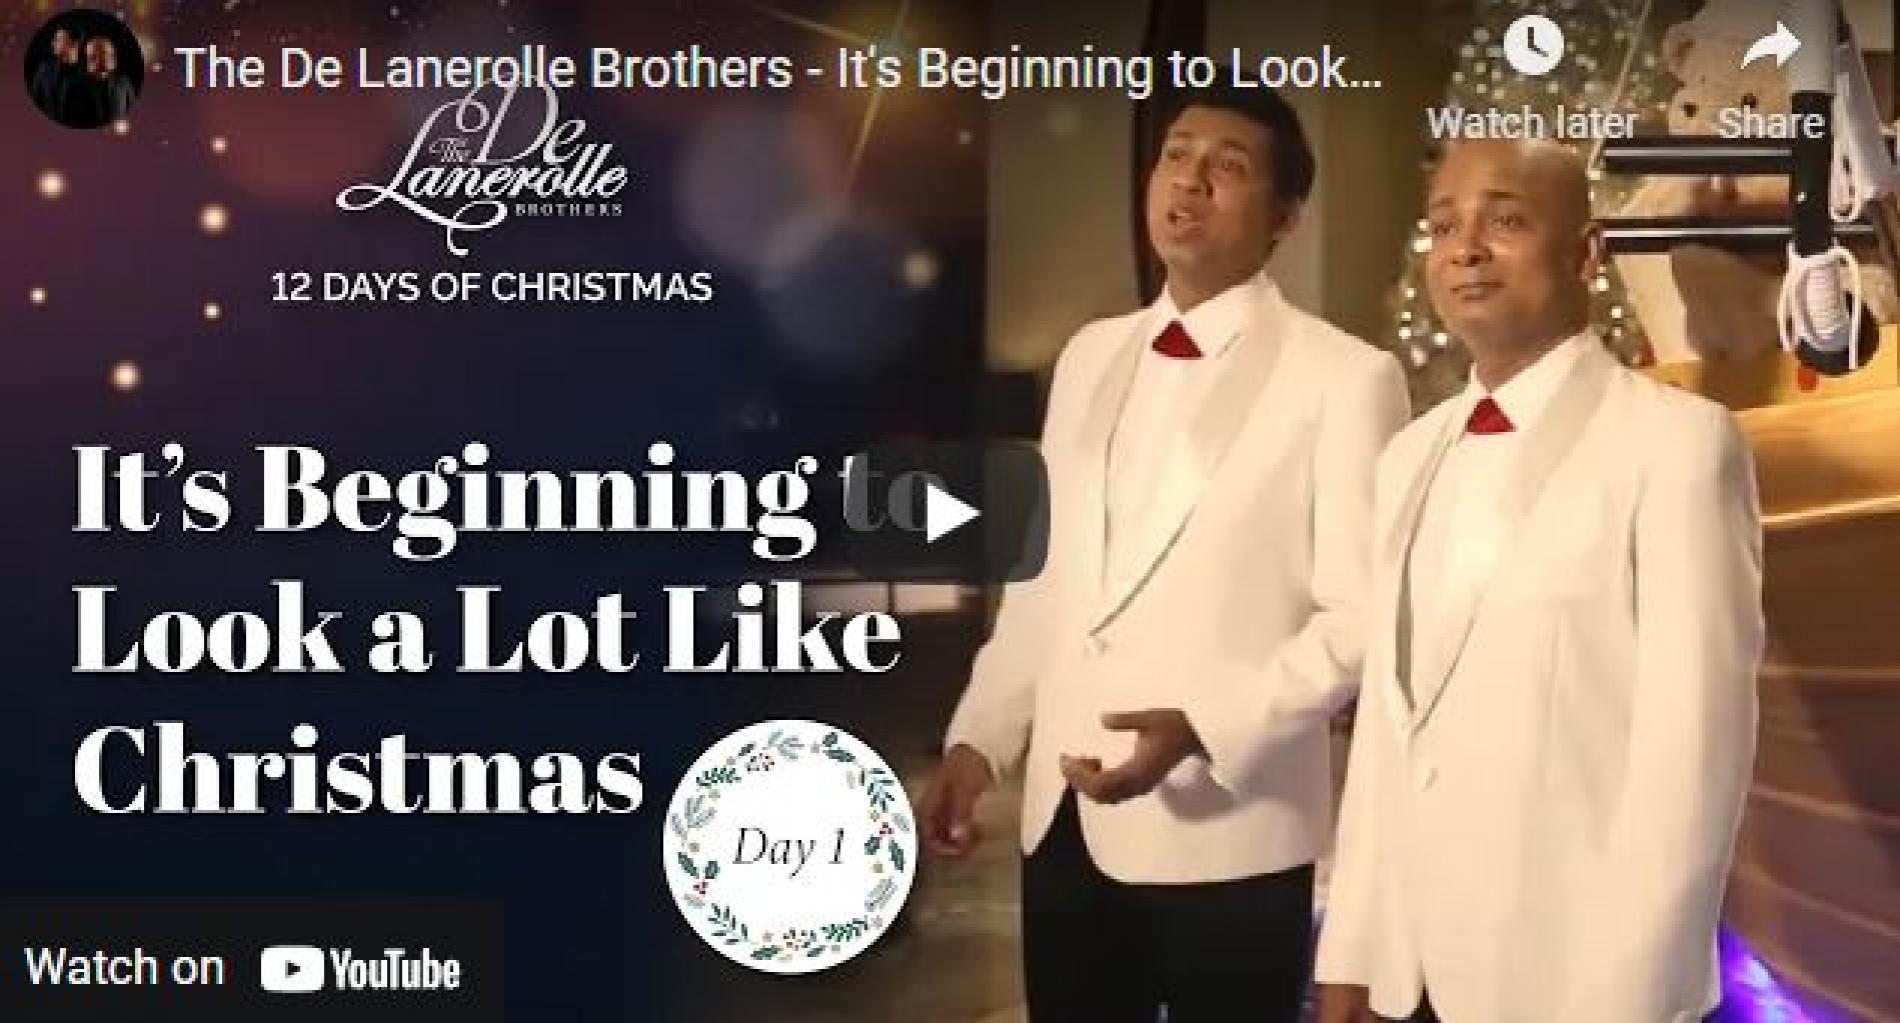 The De Lanerolle Brothers – It’s Beginning To Look A Lot Like Christmas